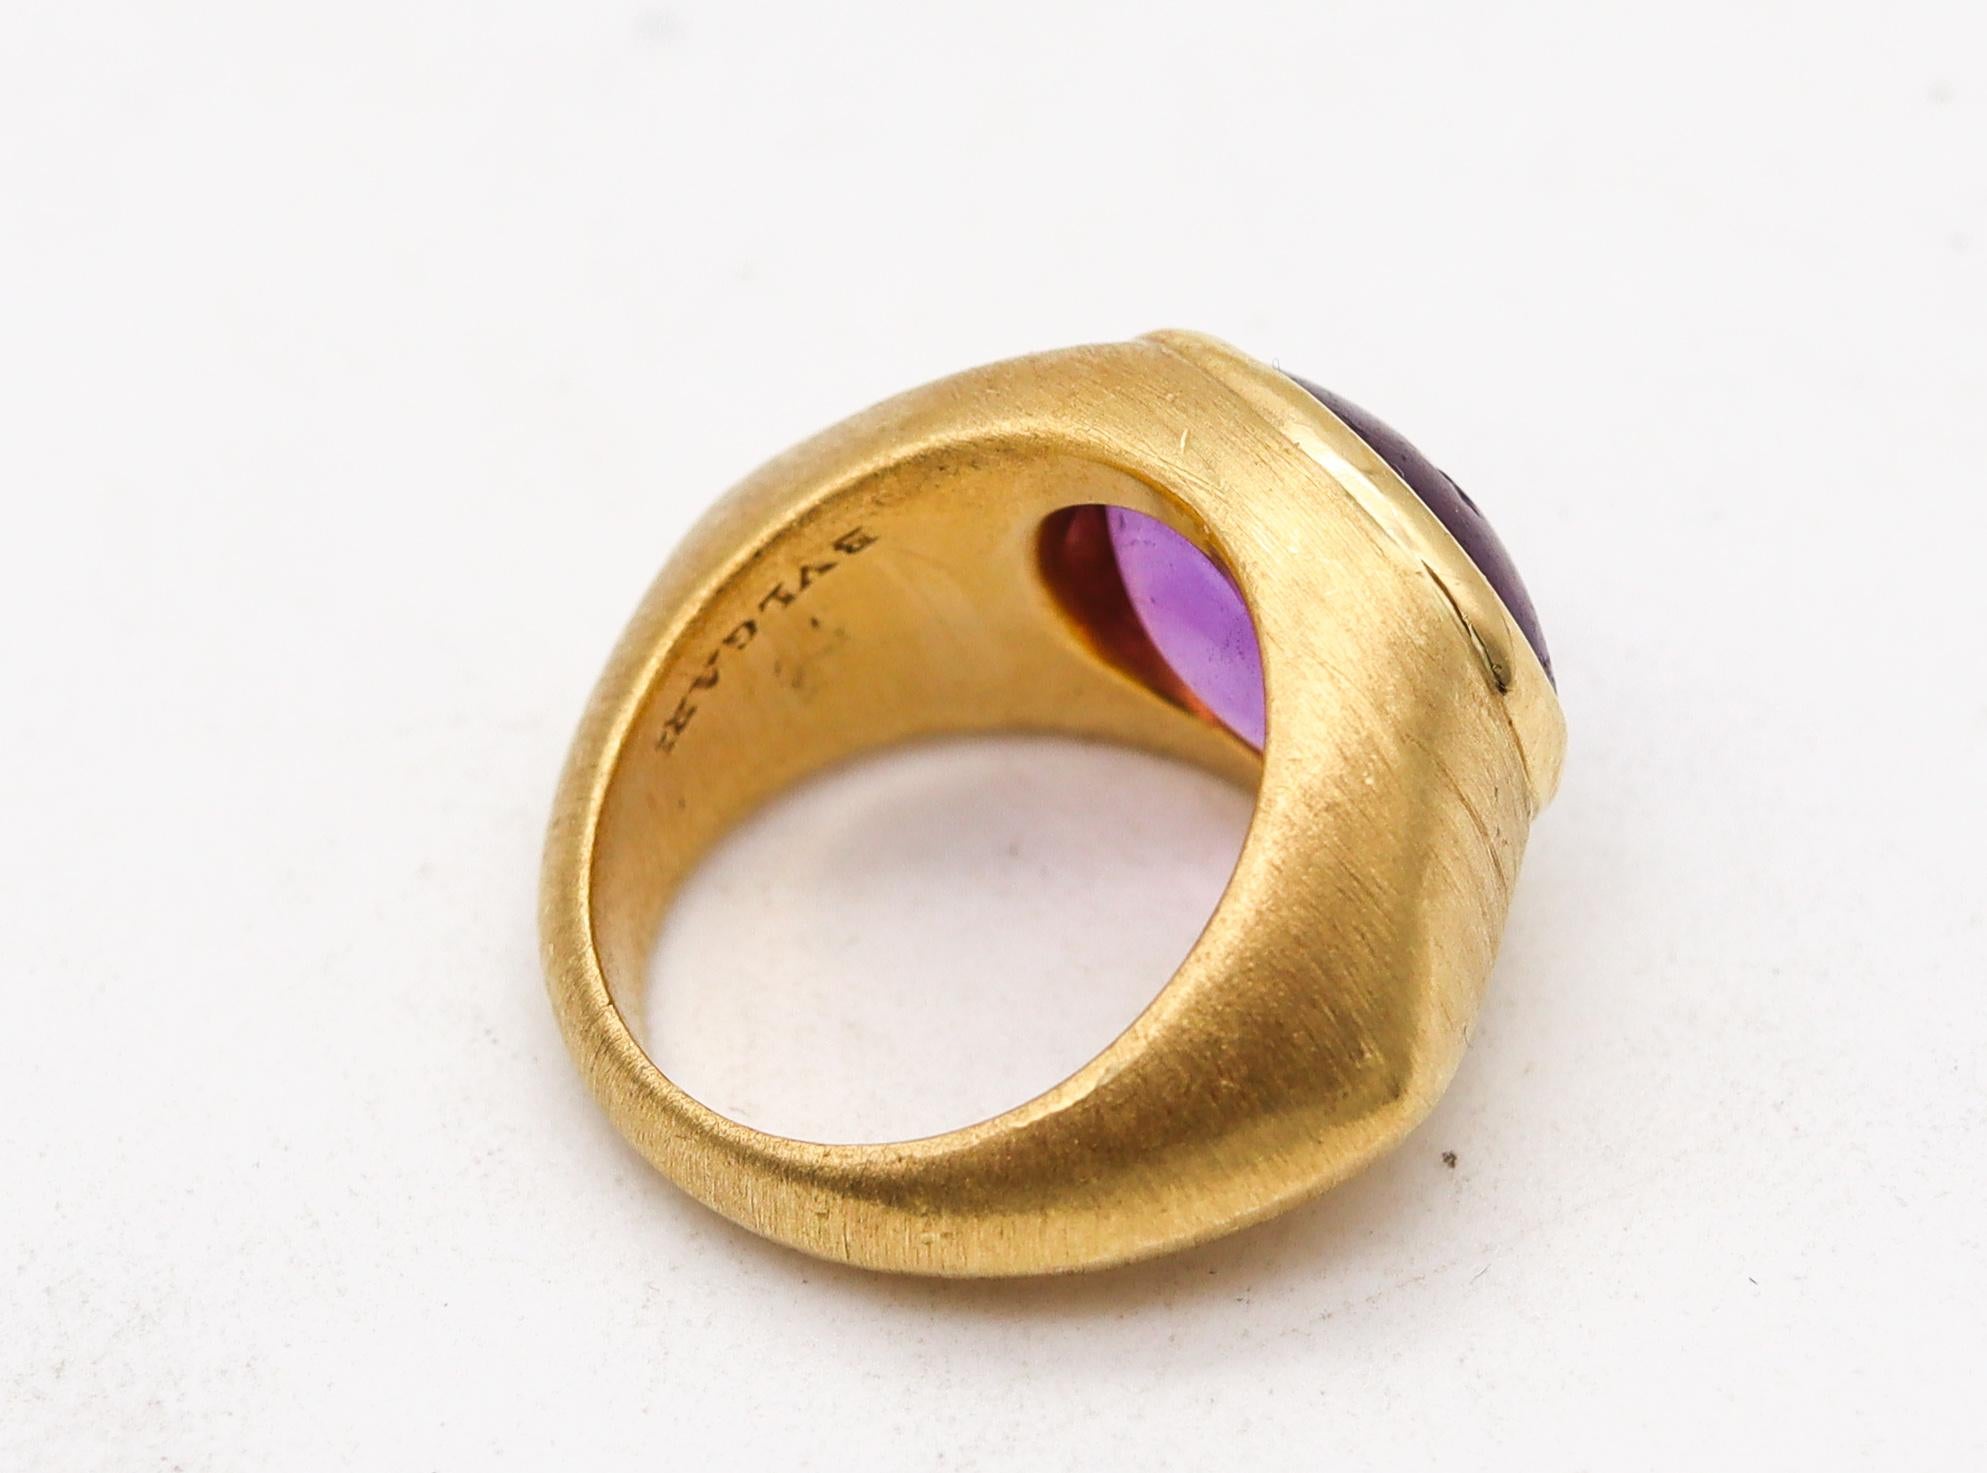 Mixed Cut Bvlgari Roma 1970 Intaglio Signet Ring In 20Kt  & 18Kt Gold With Ancient Carving